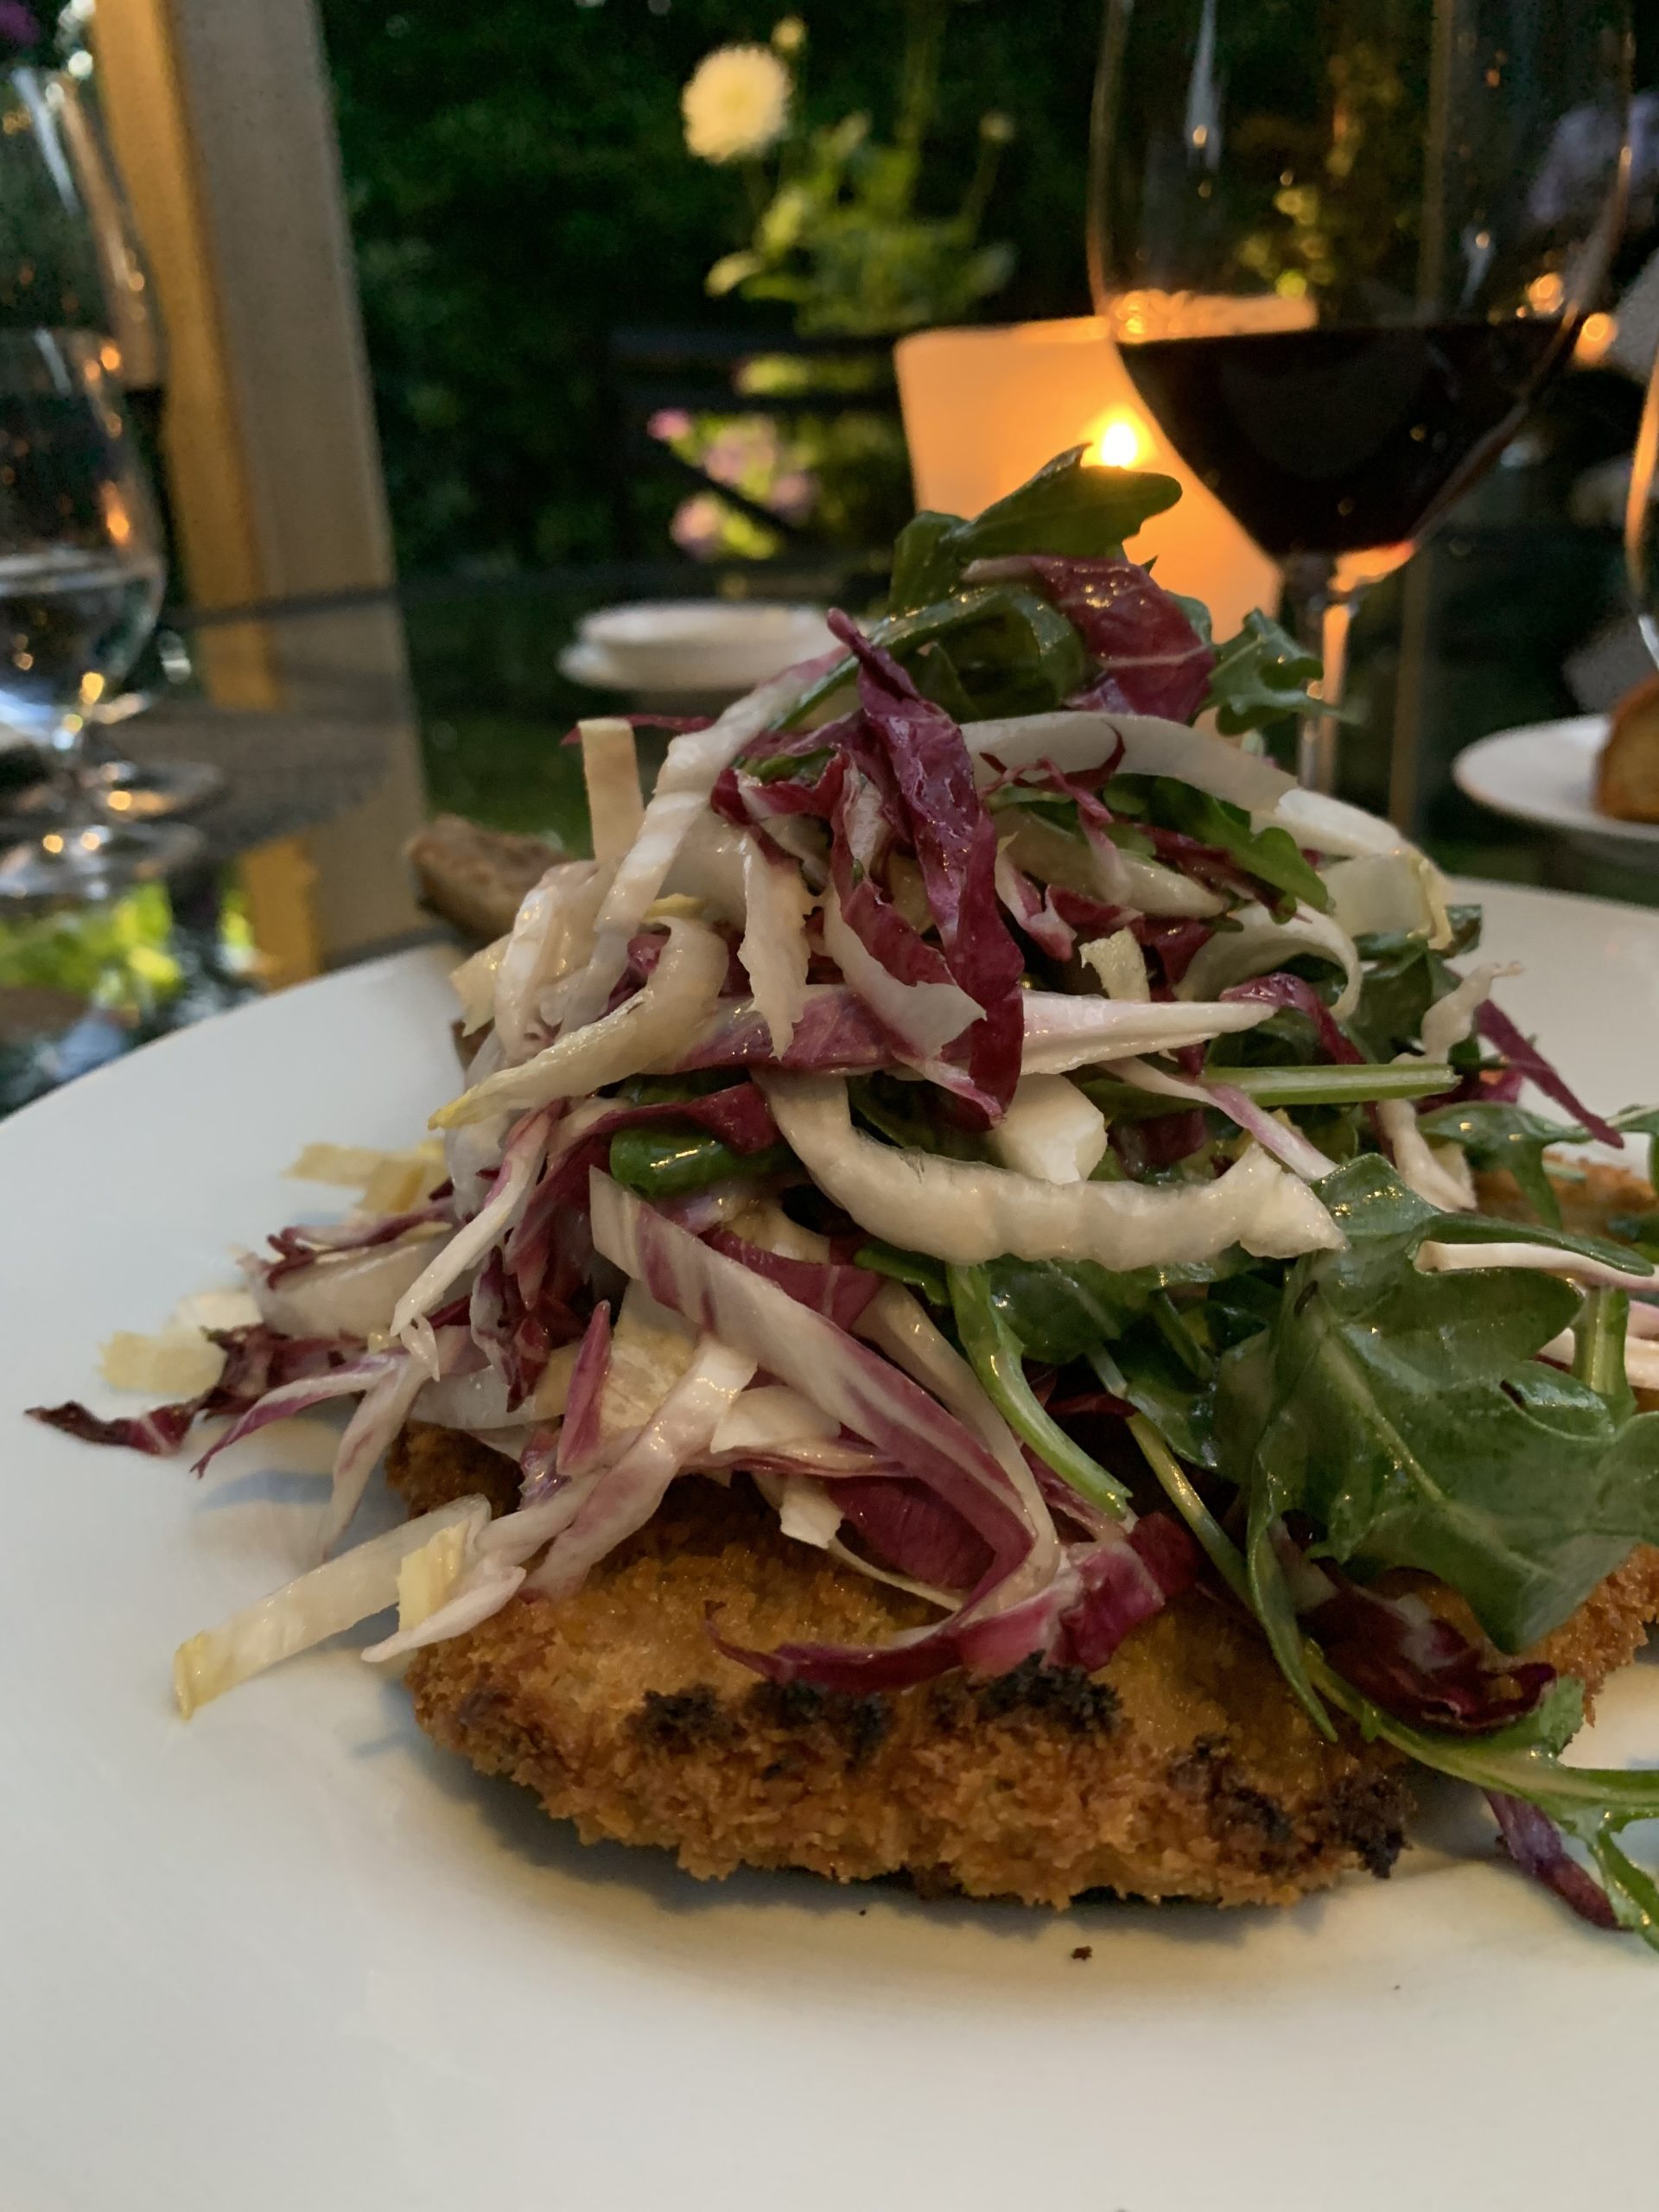 Berkshire pork Milanese is topped with a Insalata Tricolore and a Nero d'Avola vinegrette Chef Rozzi crafted while the restaurant was closed to dining except for take-out orders.  